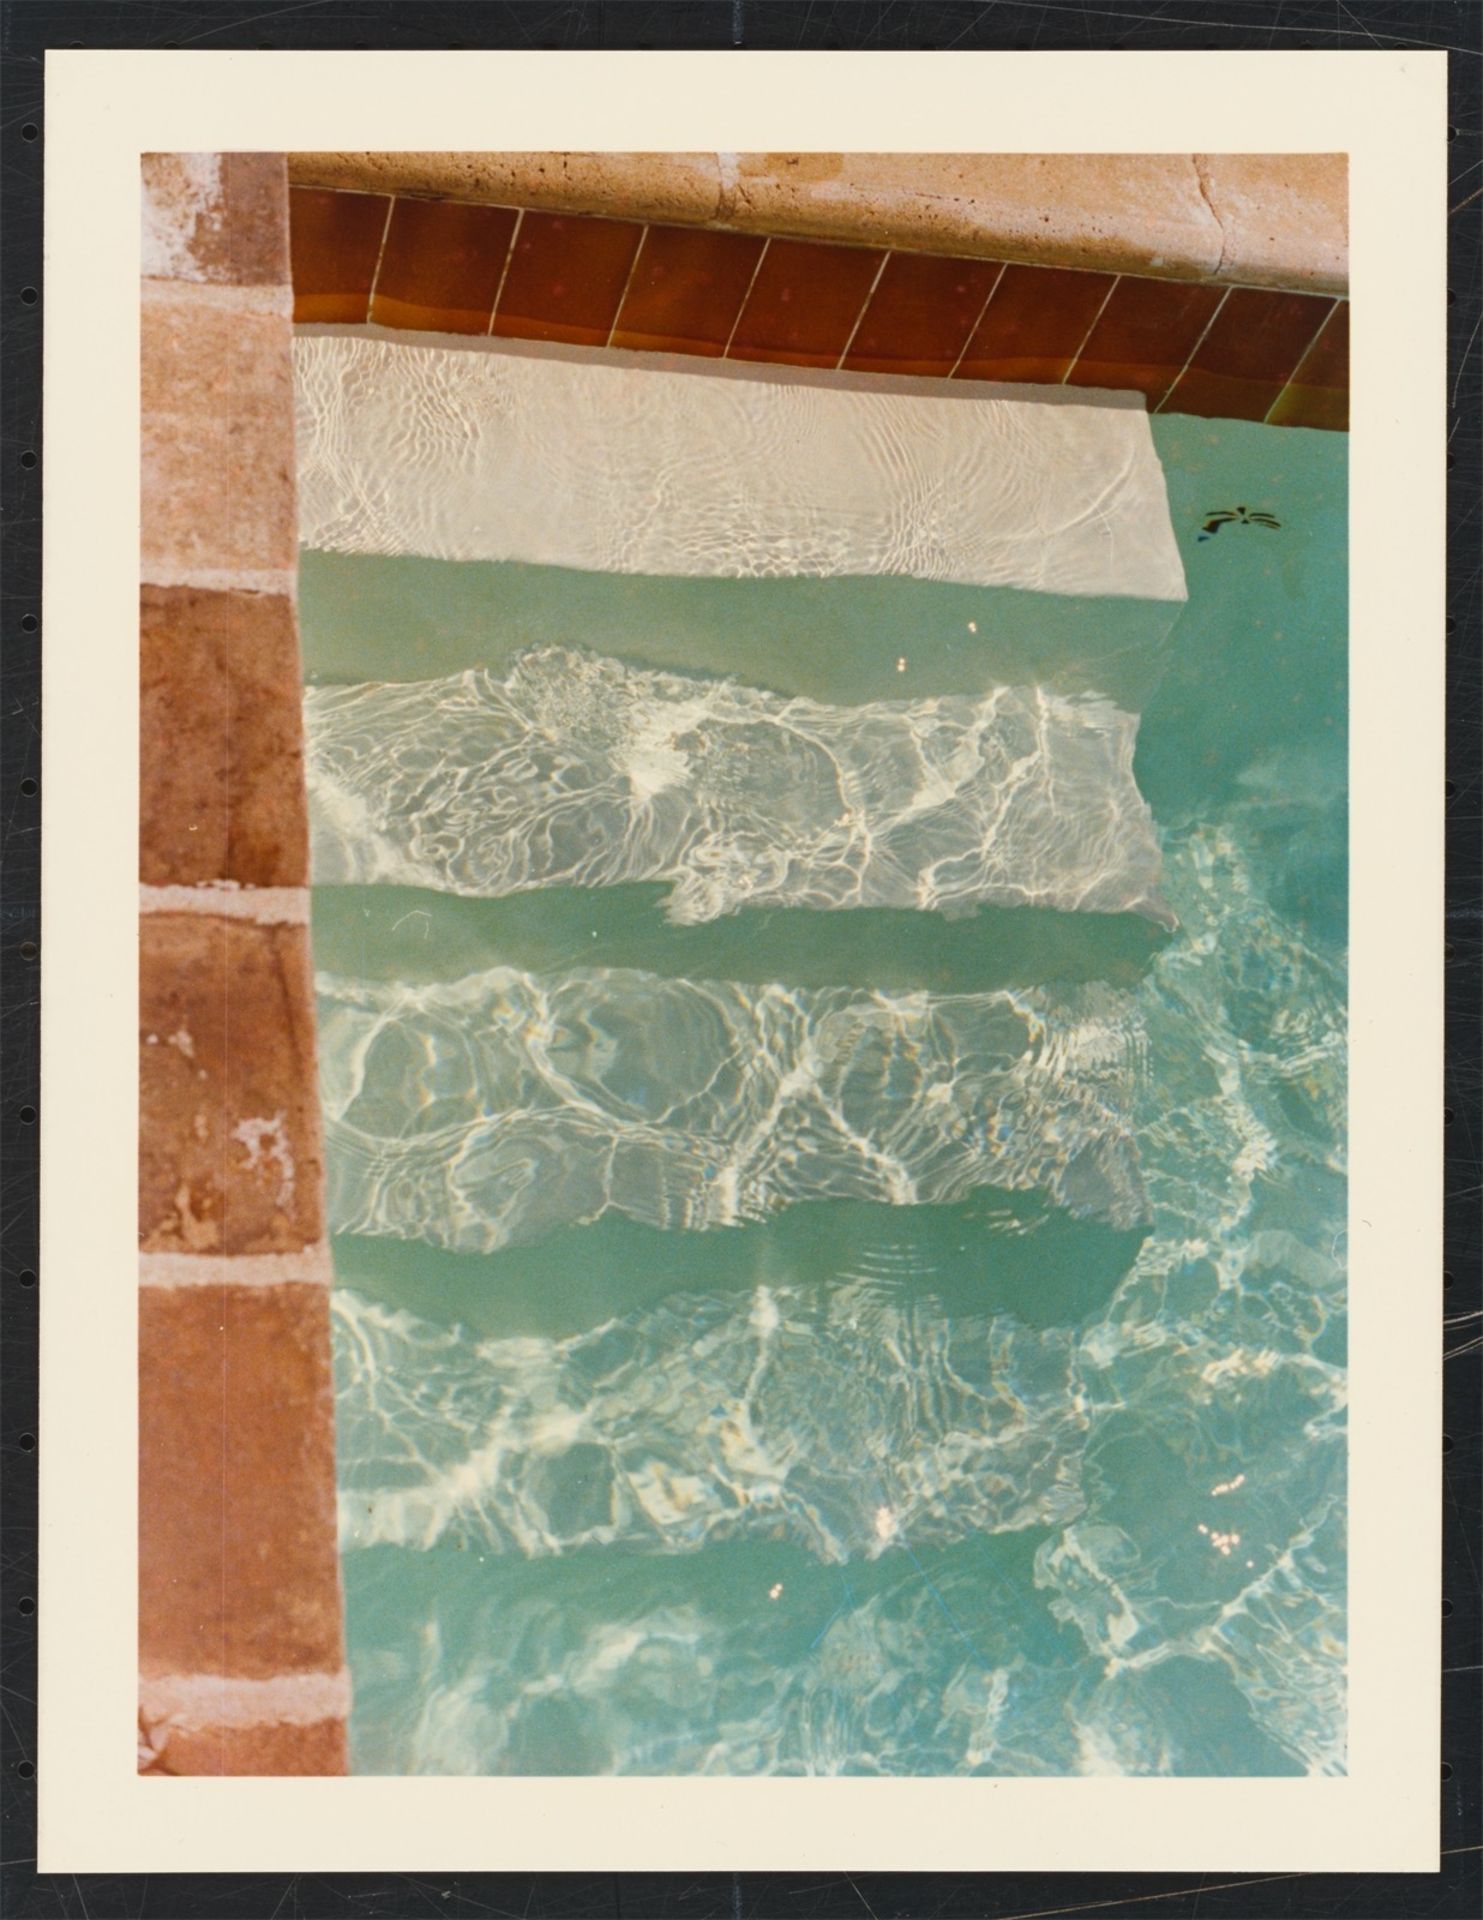 David Hockney. Convolute from: ”Twenty Photographic Pictures”, 1970–1975. - Image 2 of 33